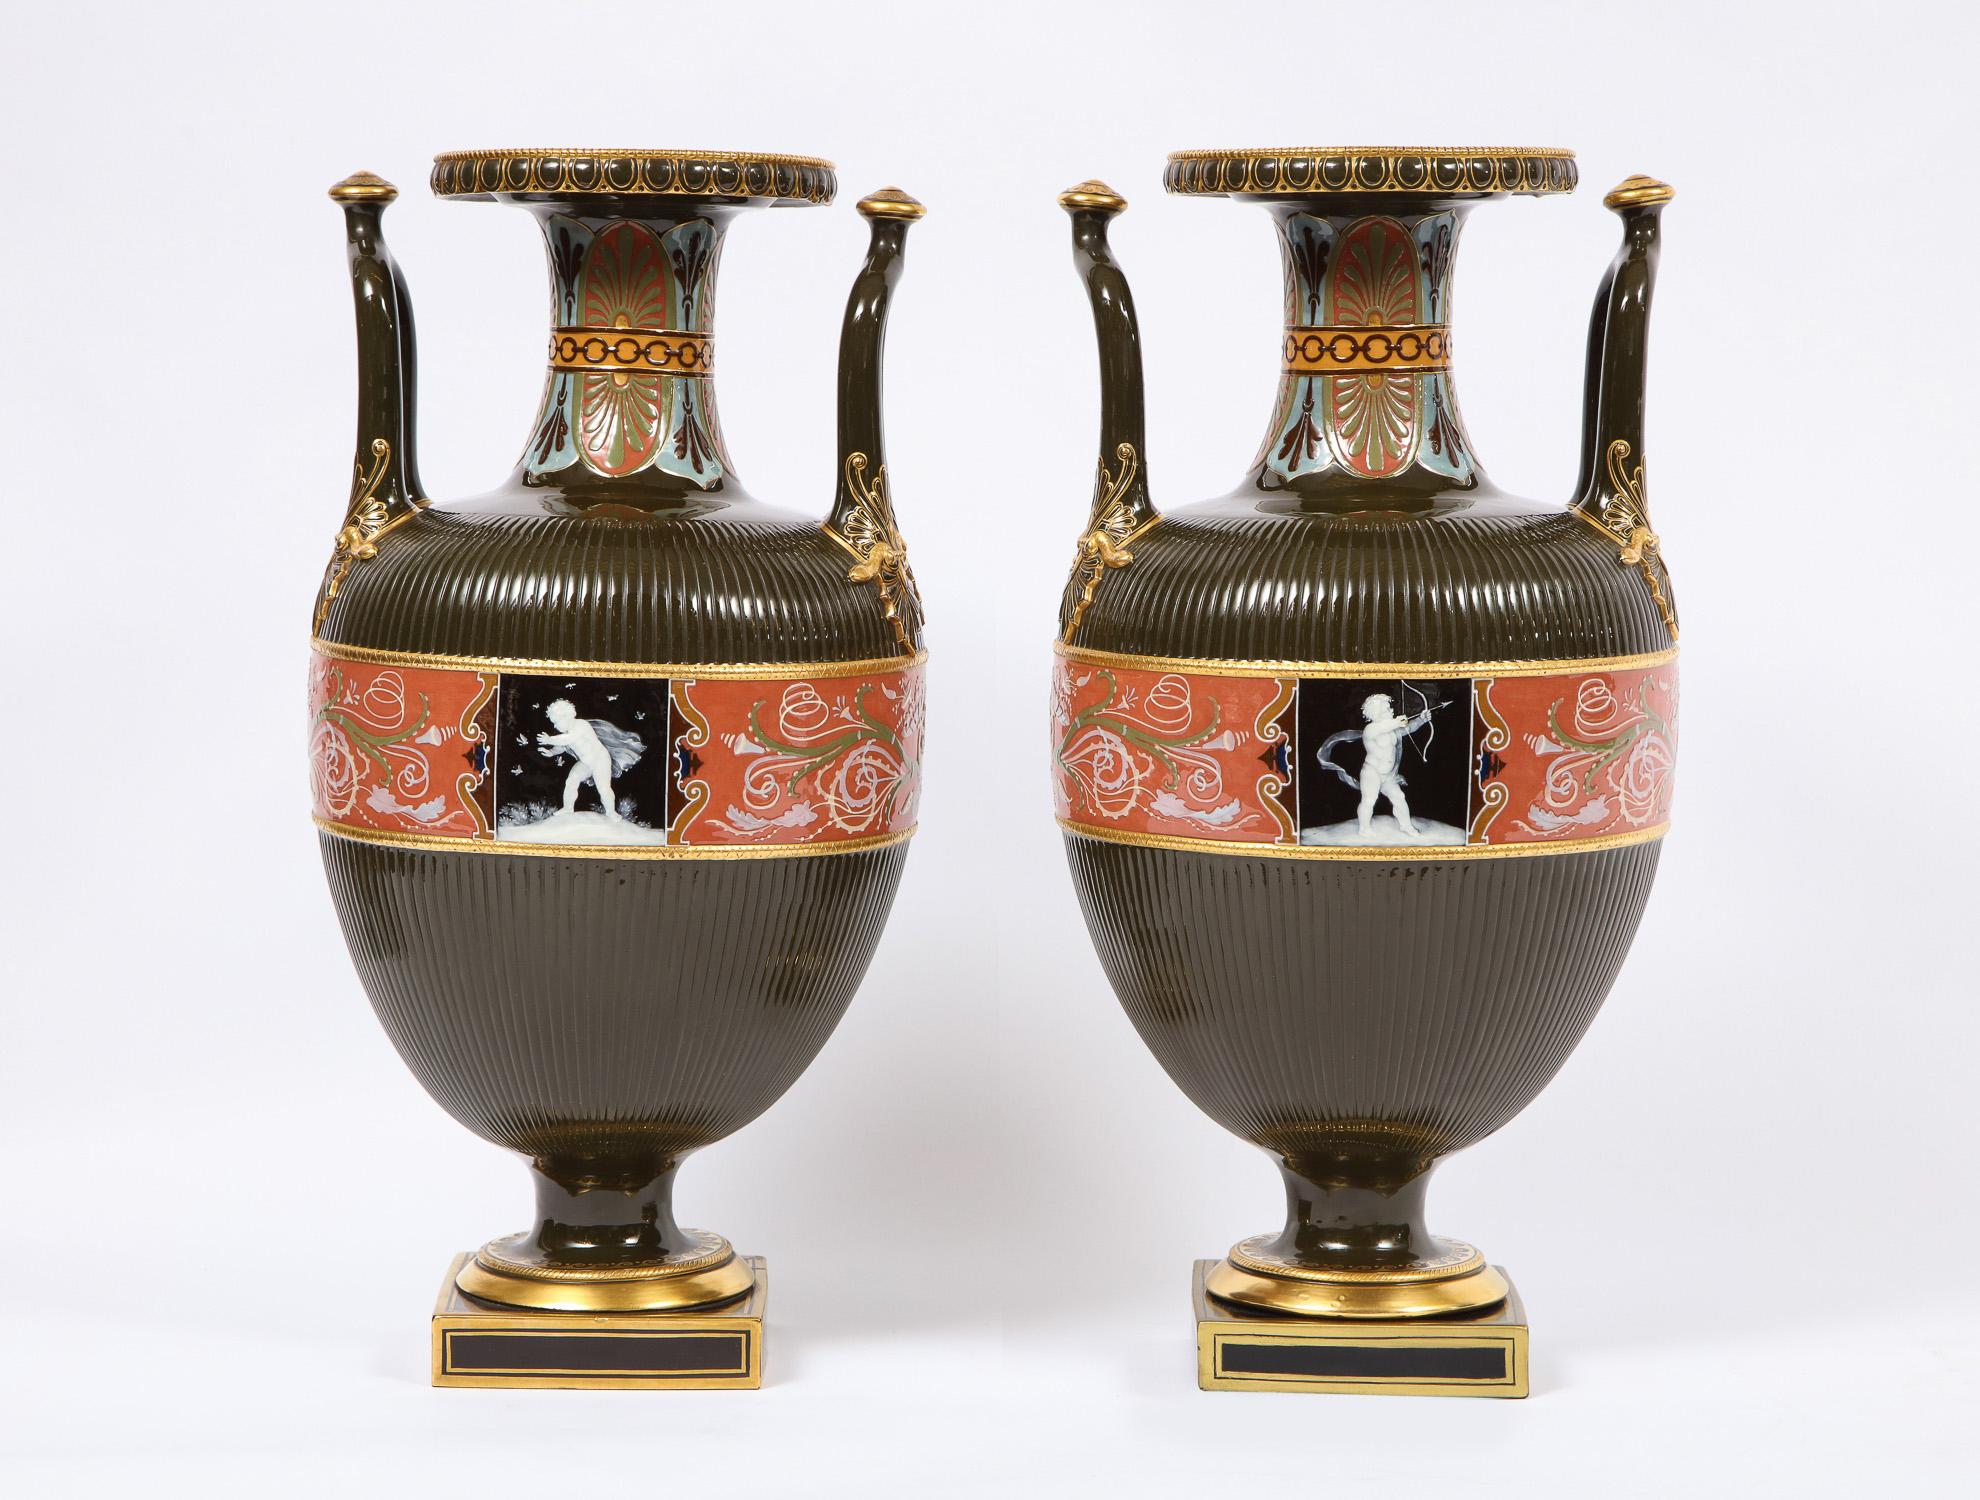 Gilt Pair of Mintons Pate Sur Pate Vases with Multi-Panel Neoclassical Subjects